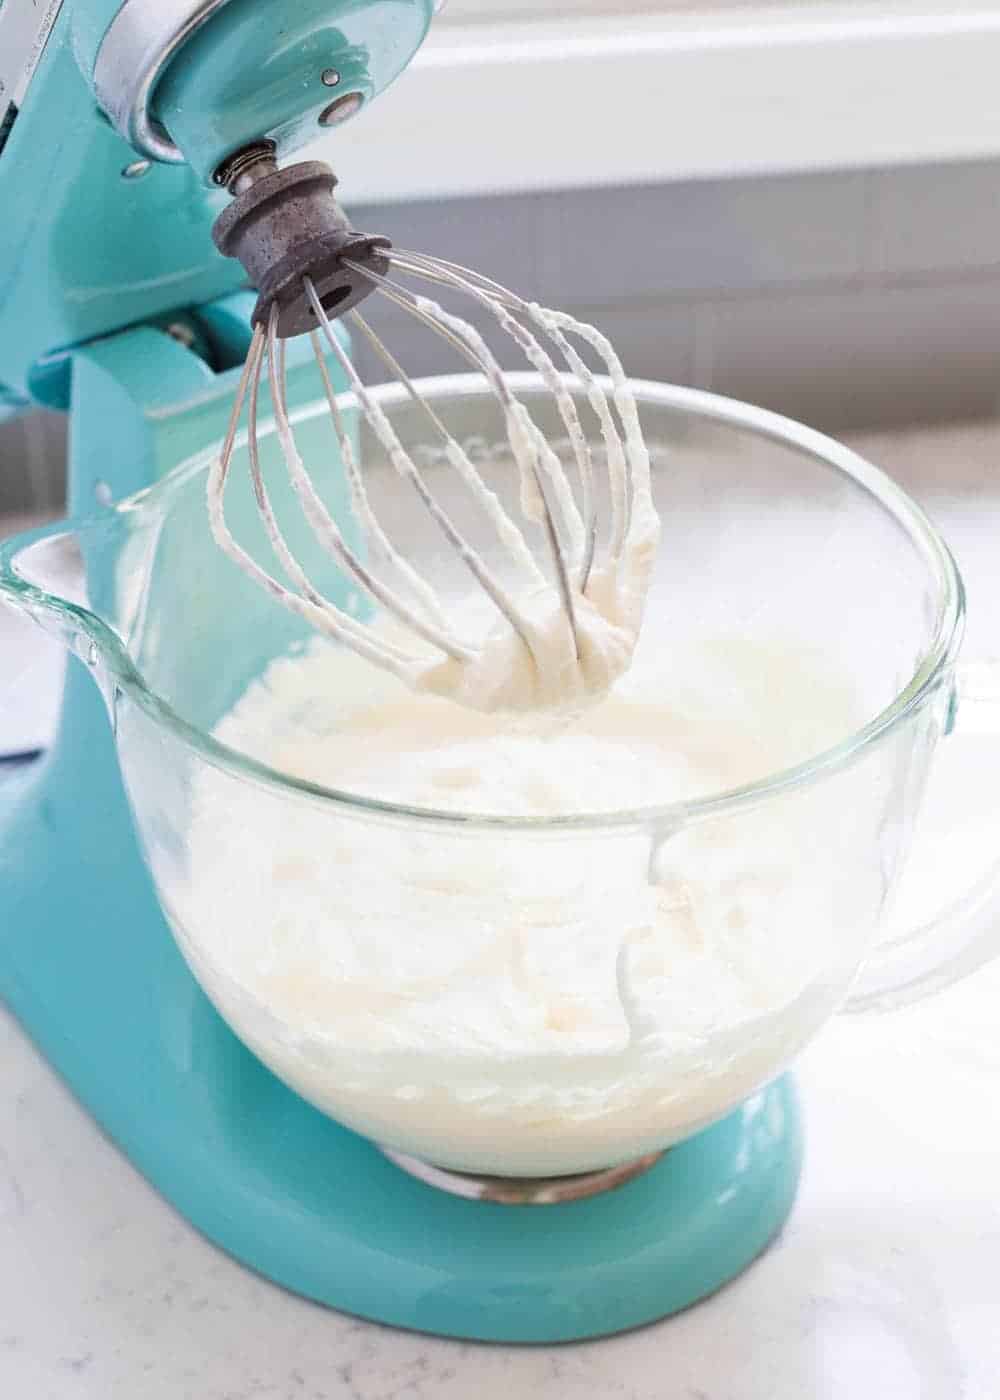 Homemade whipped cream in a blue kitchen aid mixer.